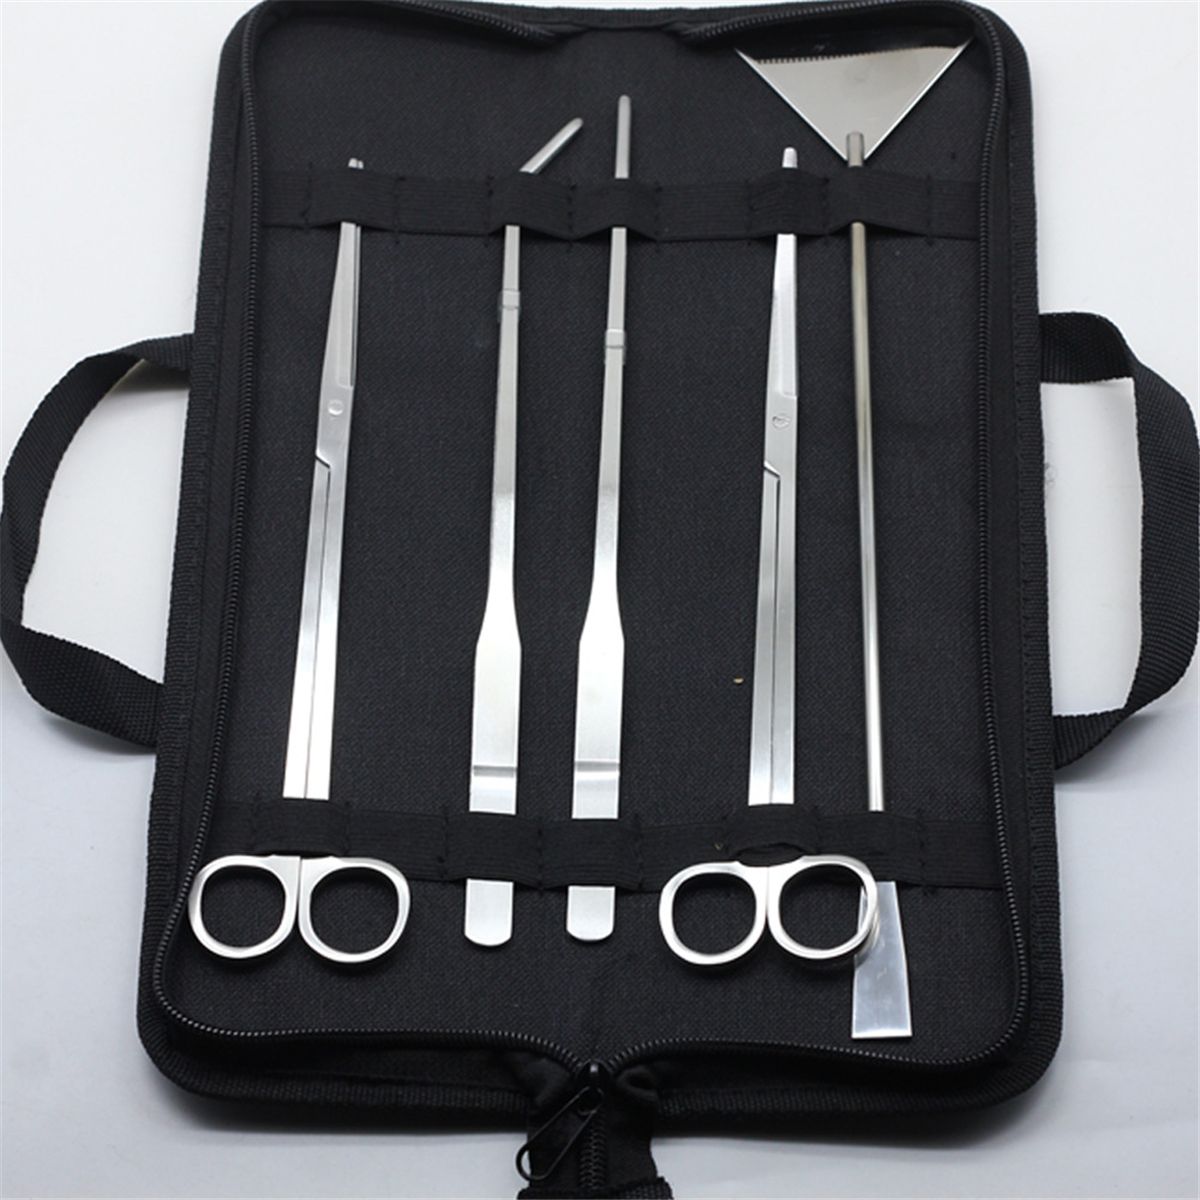 5Pcs-Stainless-Steel-Aquarium-Aquascaping-Tank-Aquatic-Plant-Fish-Cutter-Tweezers-Tool-with-Pouch-1378932